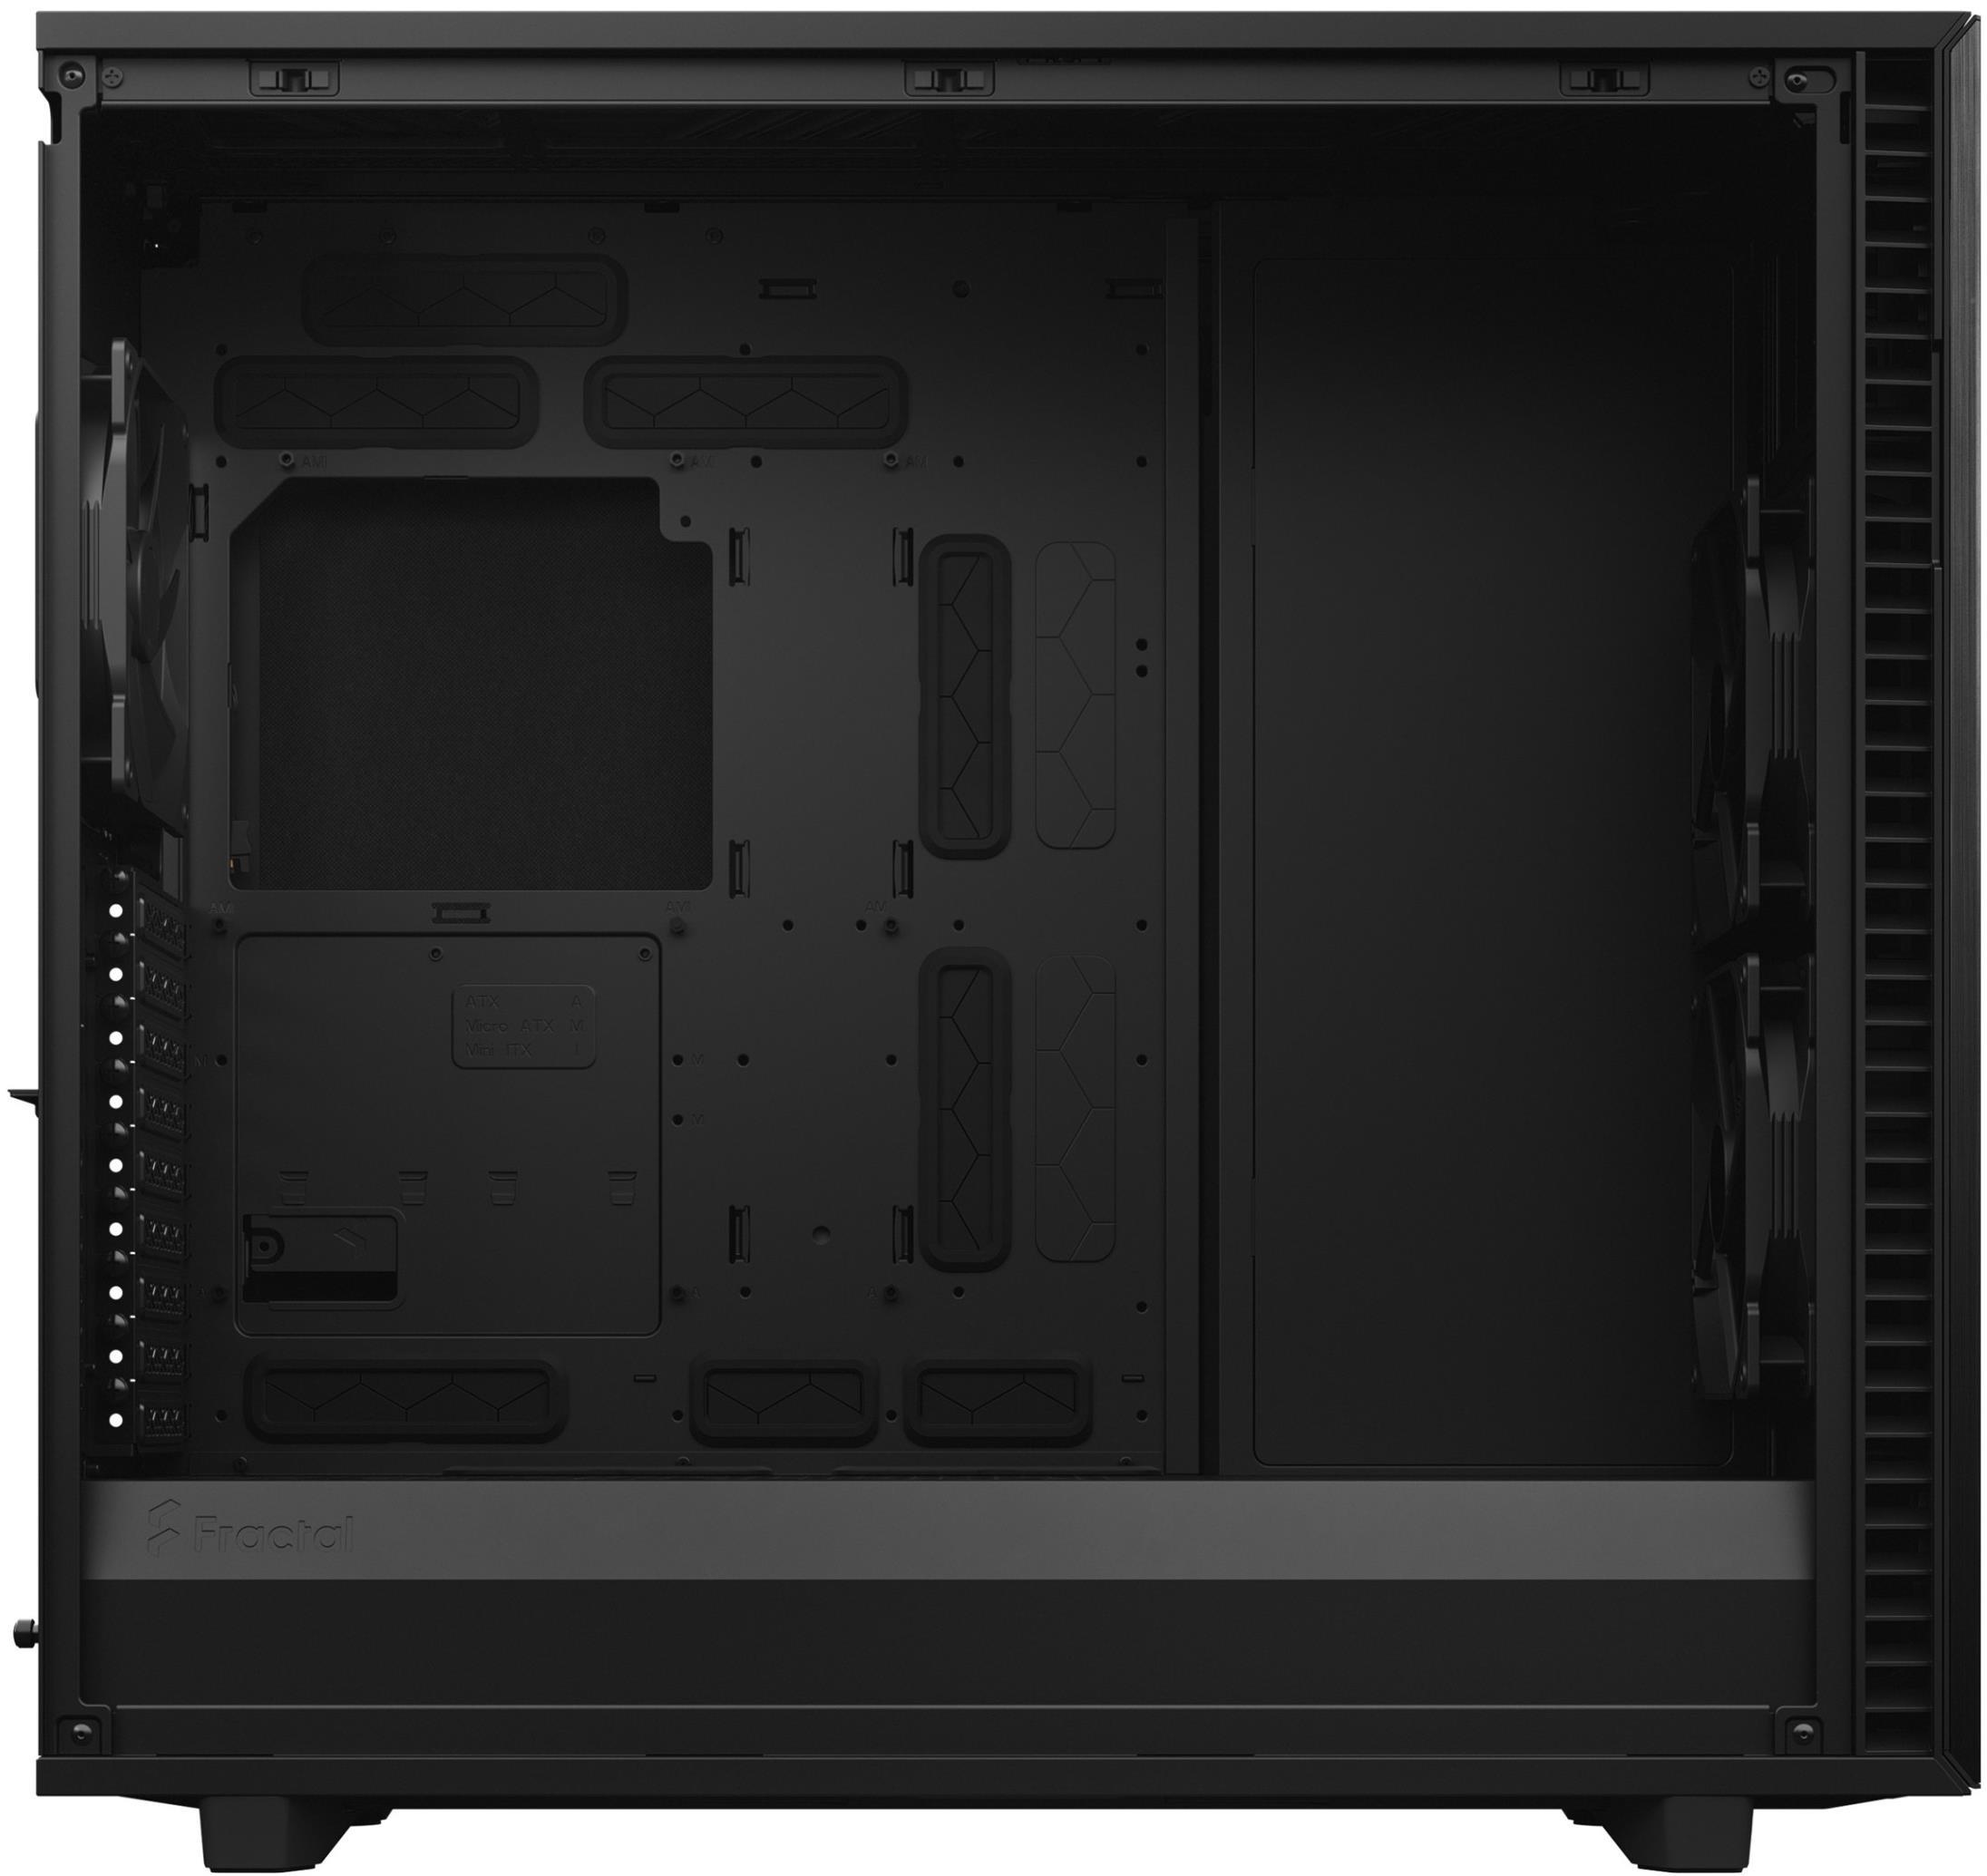 Define 7 and 7 XL from Fractal Design Launch, Refining the R6